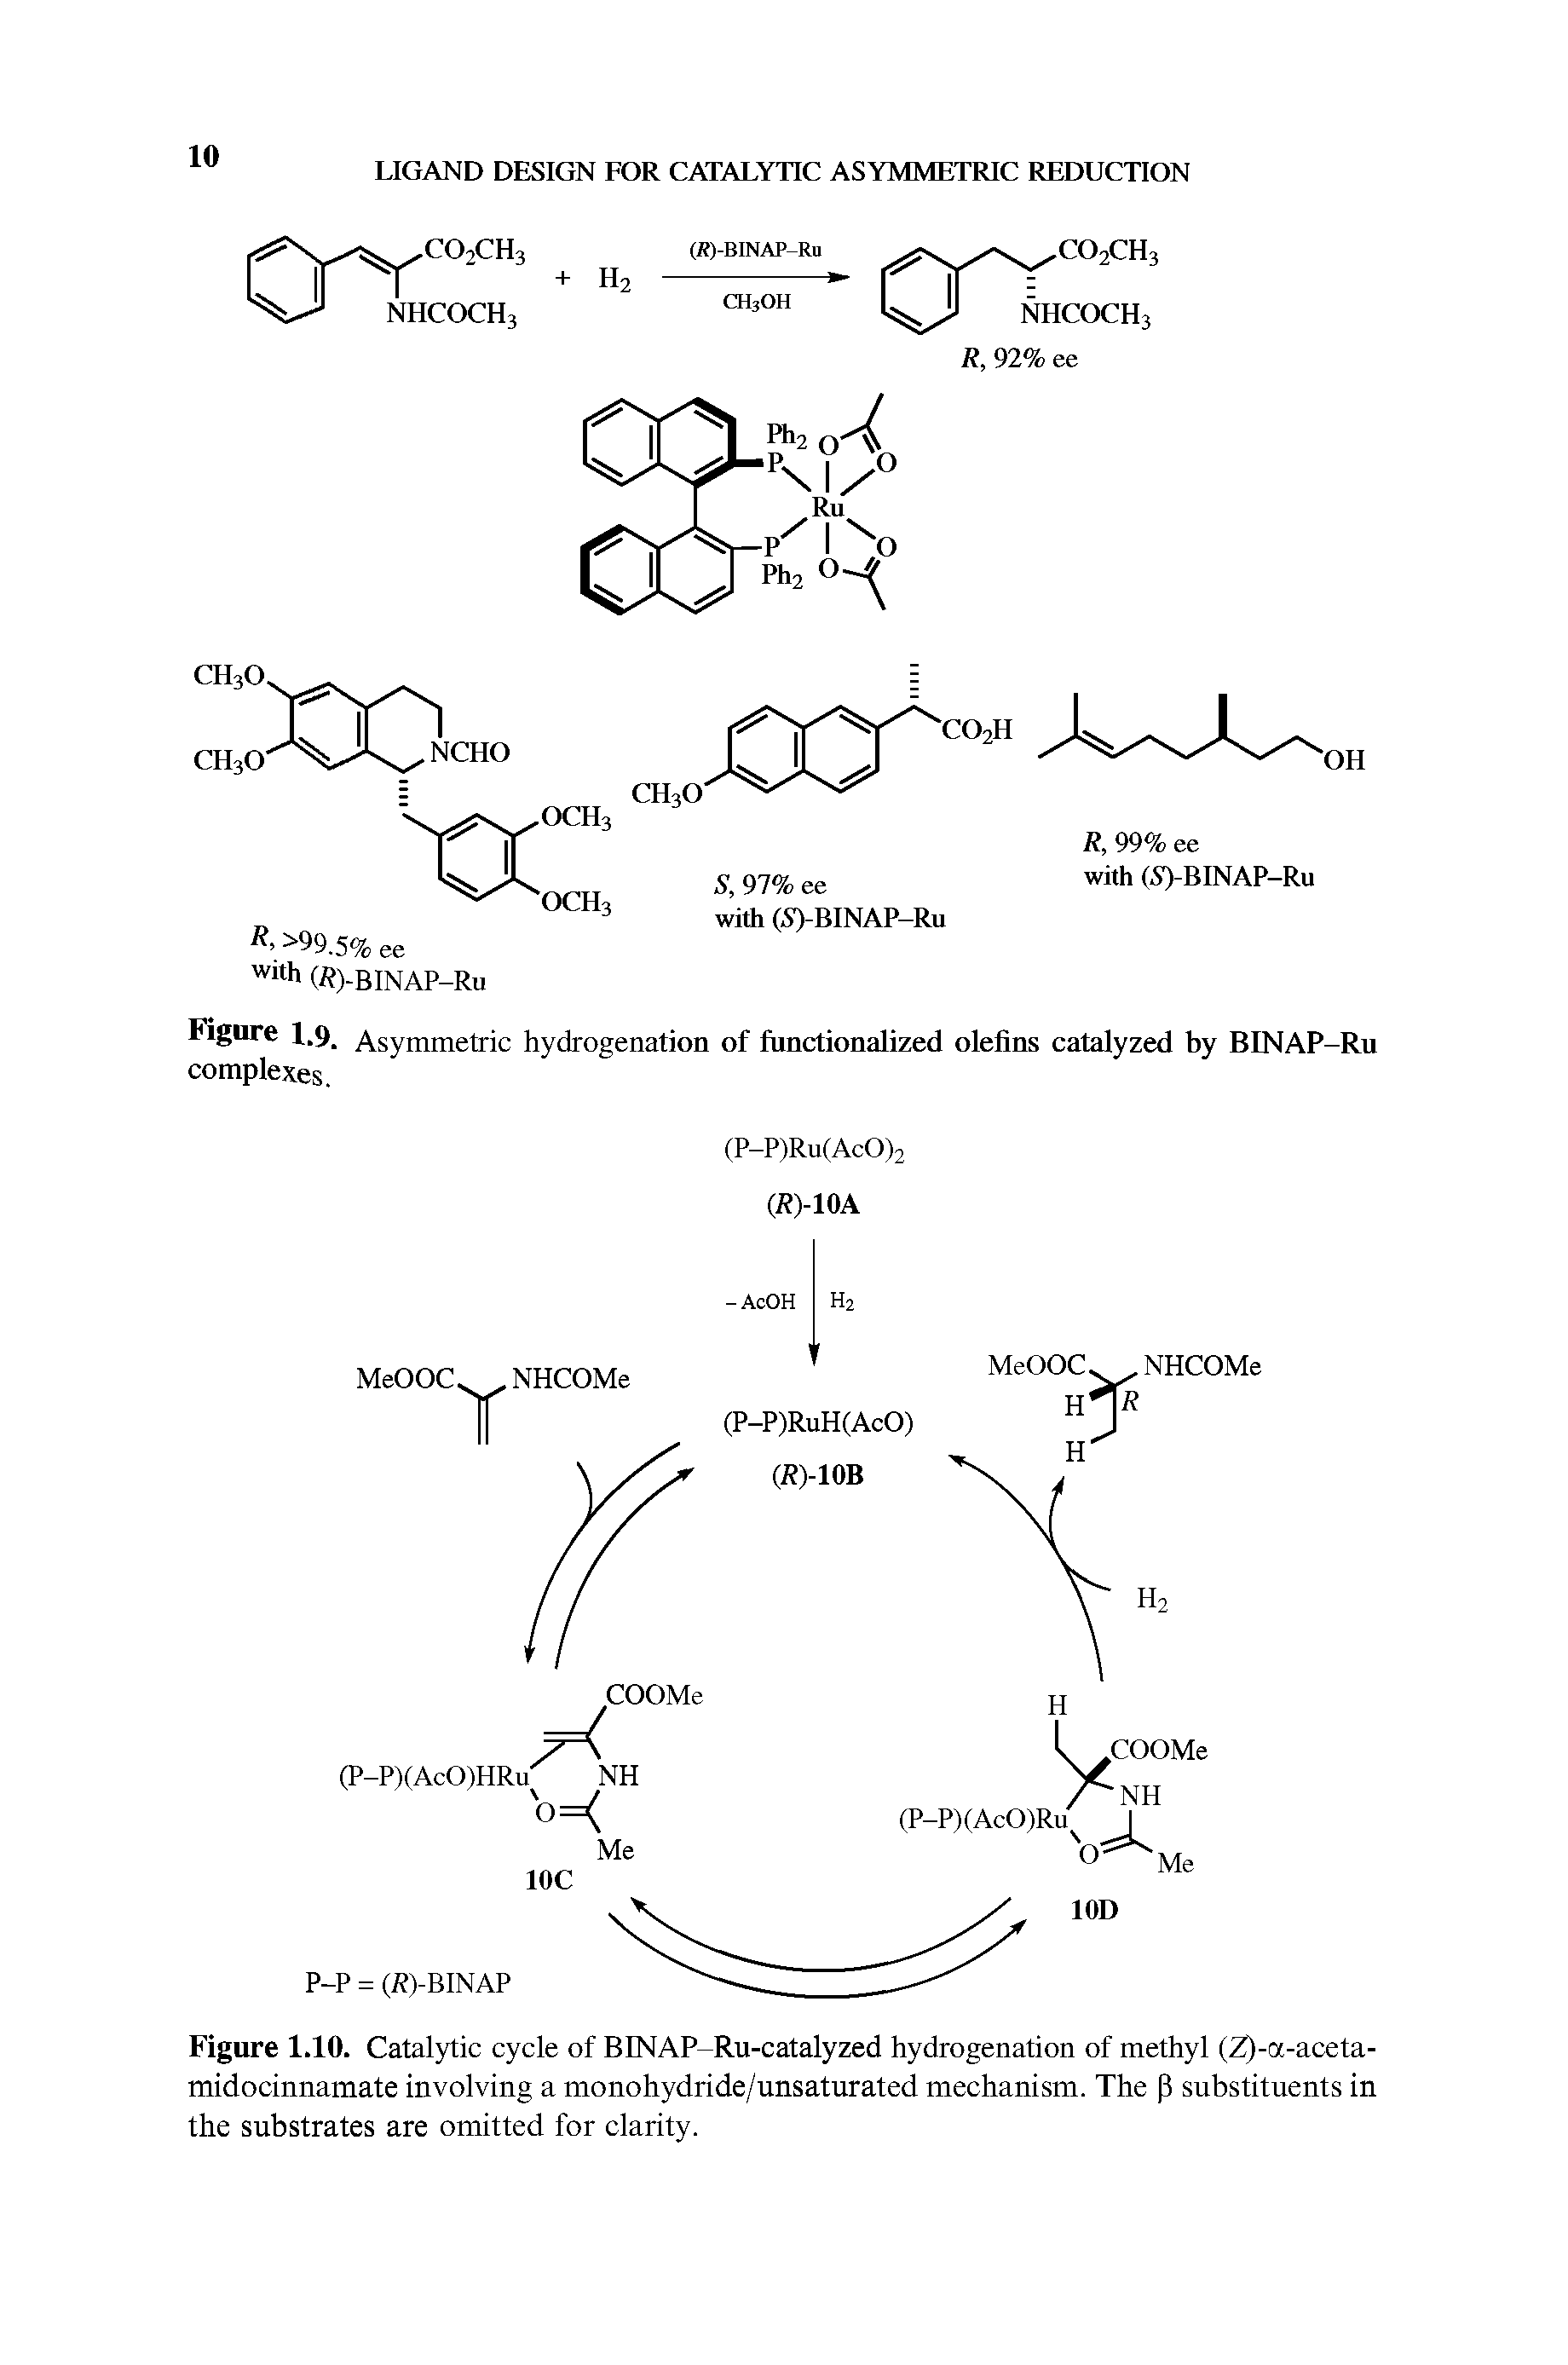 Figure 1.10. Catalytic cycle of BfNAP-Ru-catalyzed hydrogenation of methyl (Z)-a-aceta-midocinnamate involving a monohydride/unsaturated mechanism. The p substituents in the substrates are omitted for clarity.